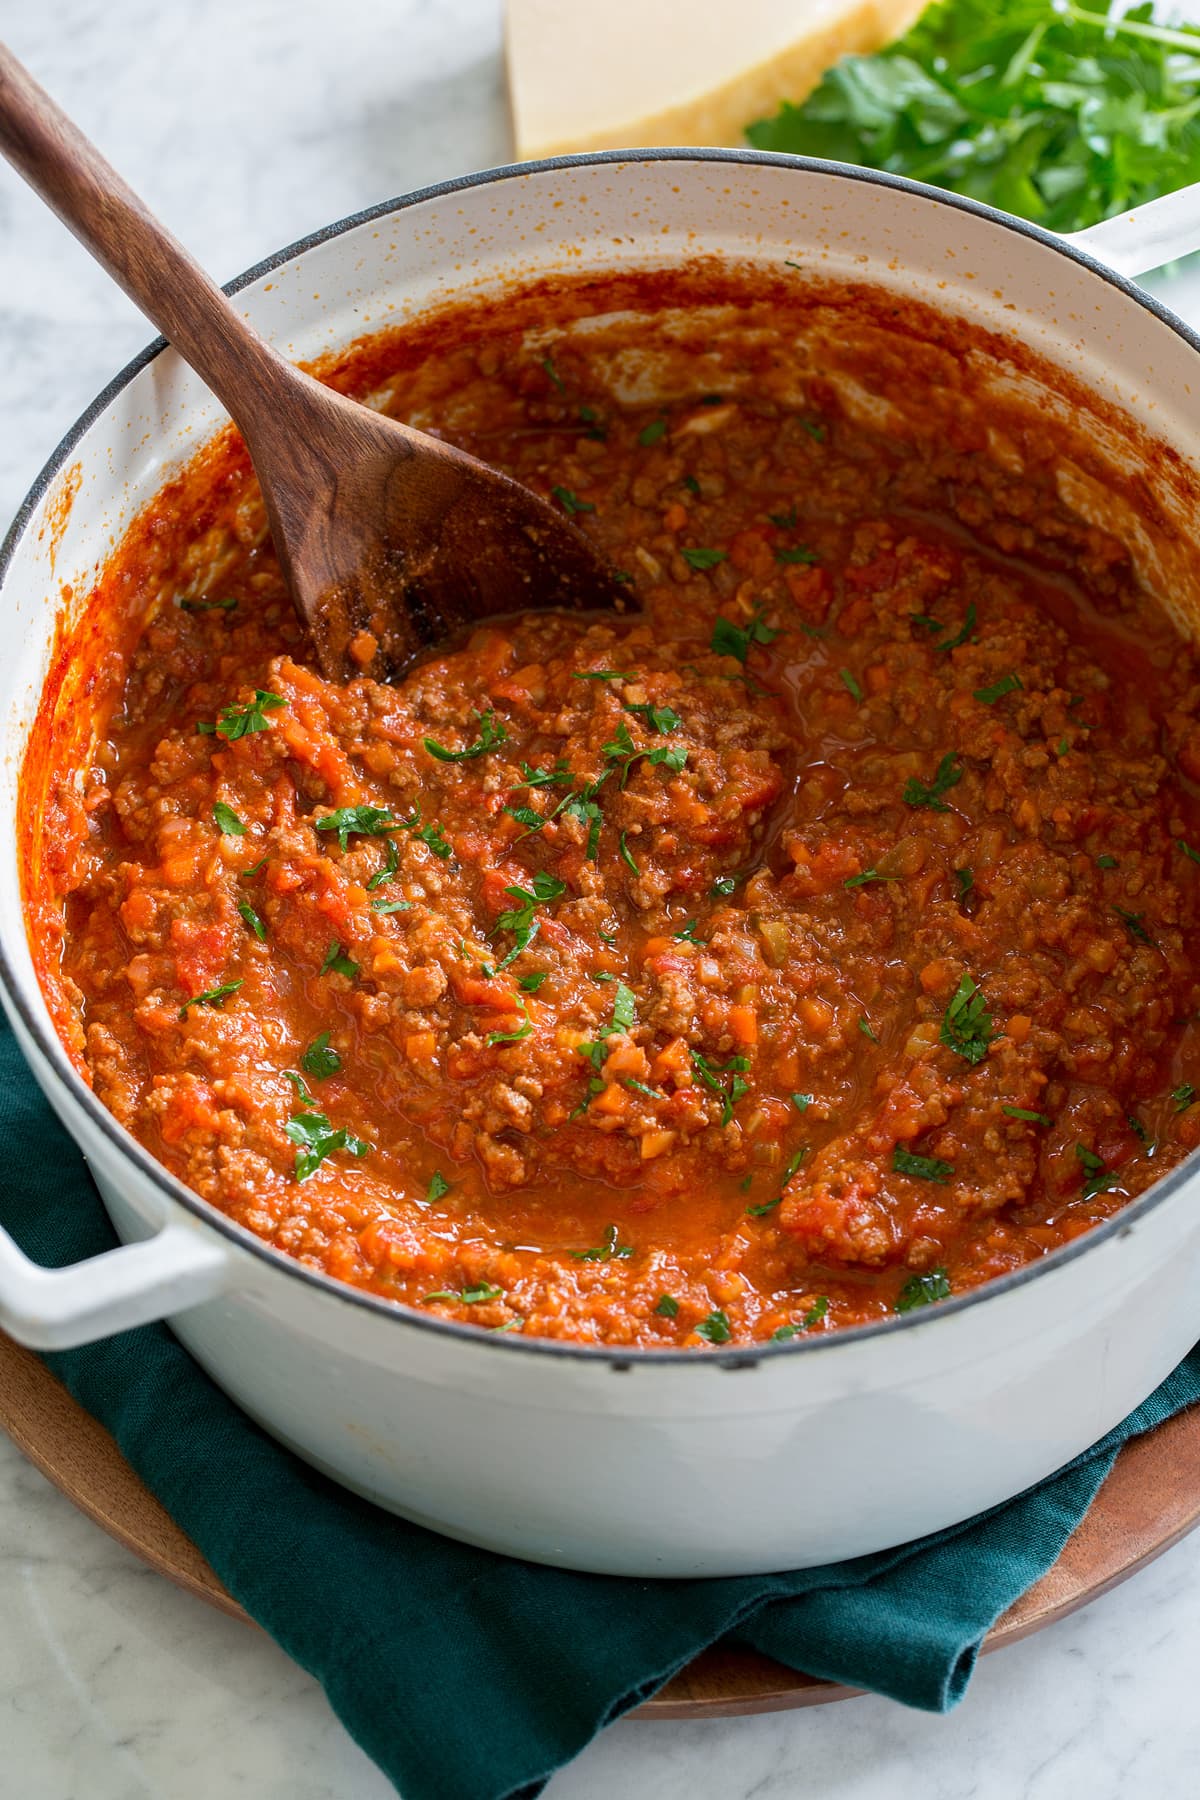 Large pot filled with homemade bolognese sauce.